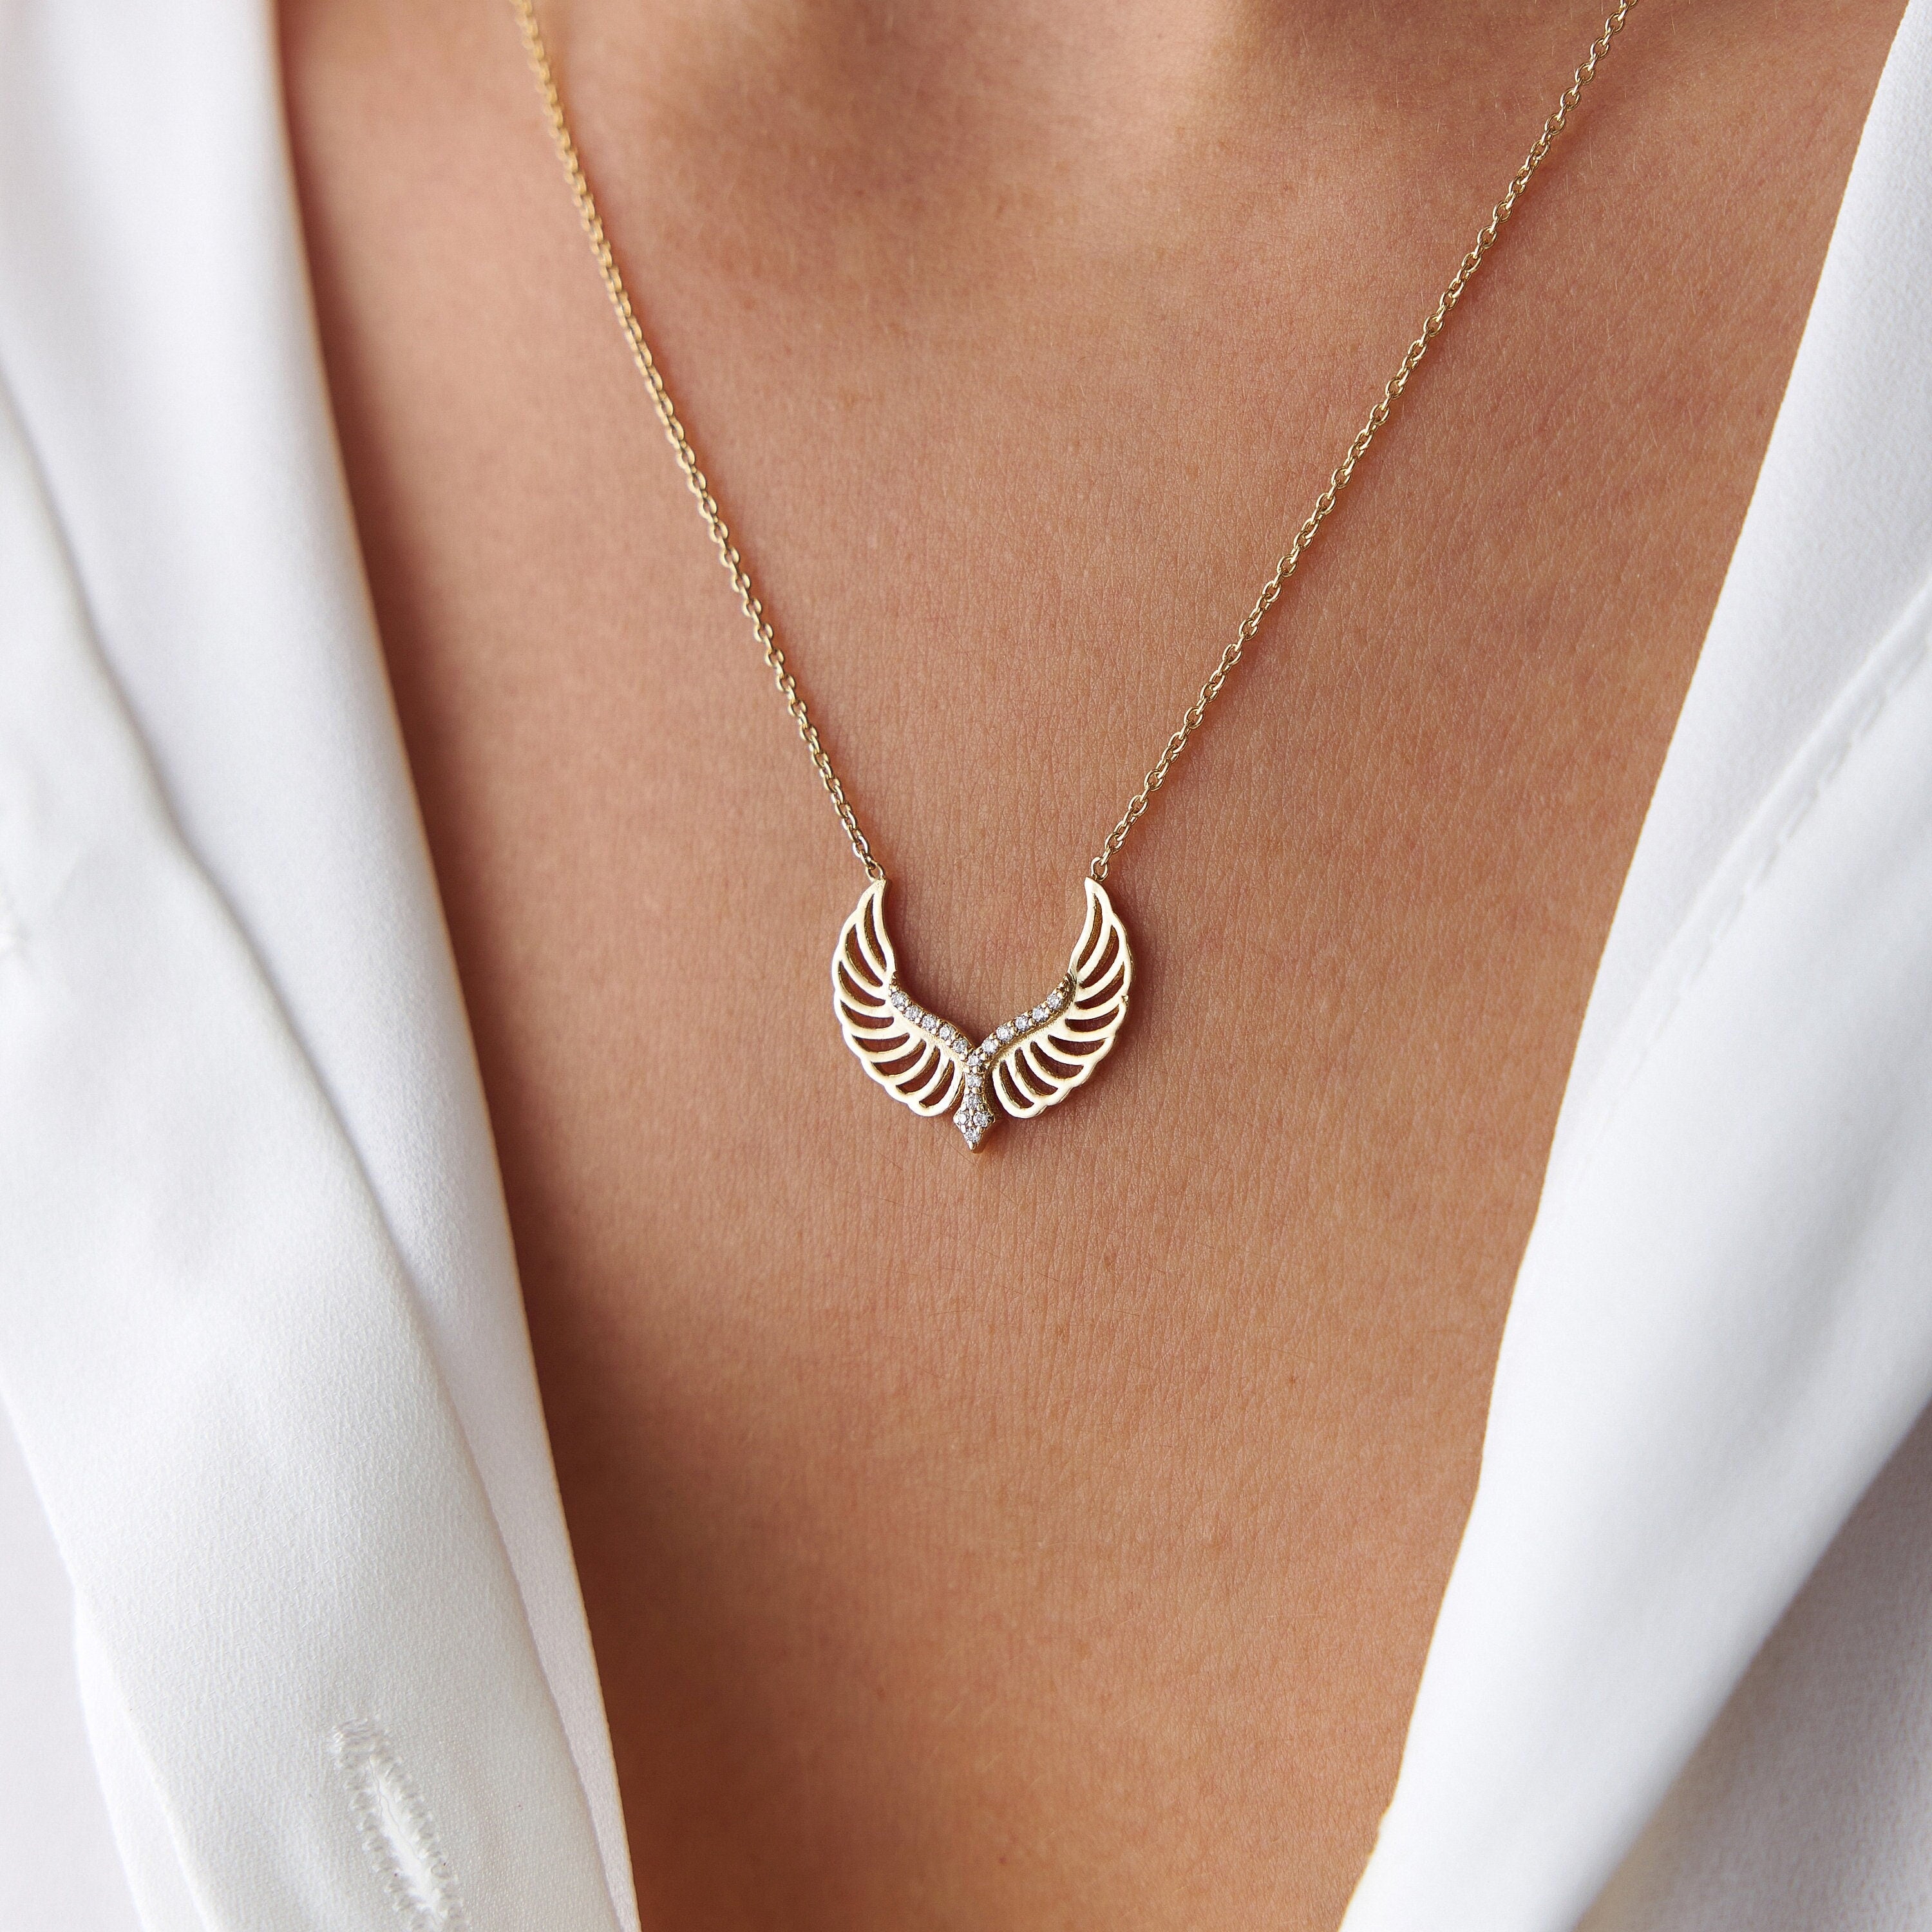 Diamond Angel Wing Necklace Available in 14K and 18K Gold